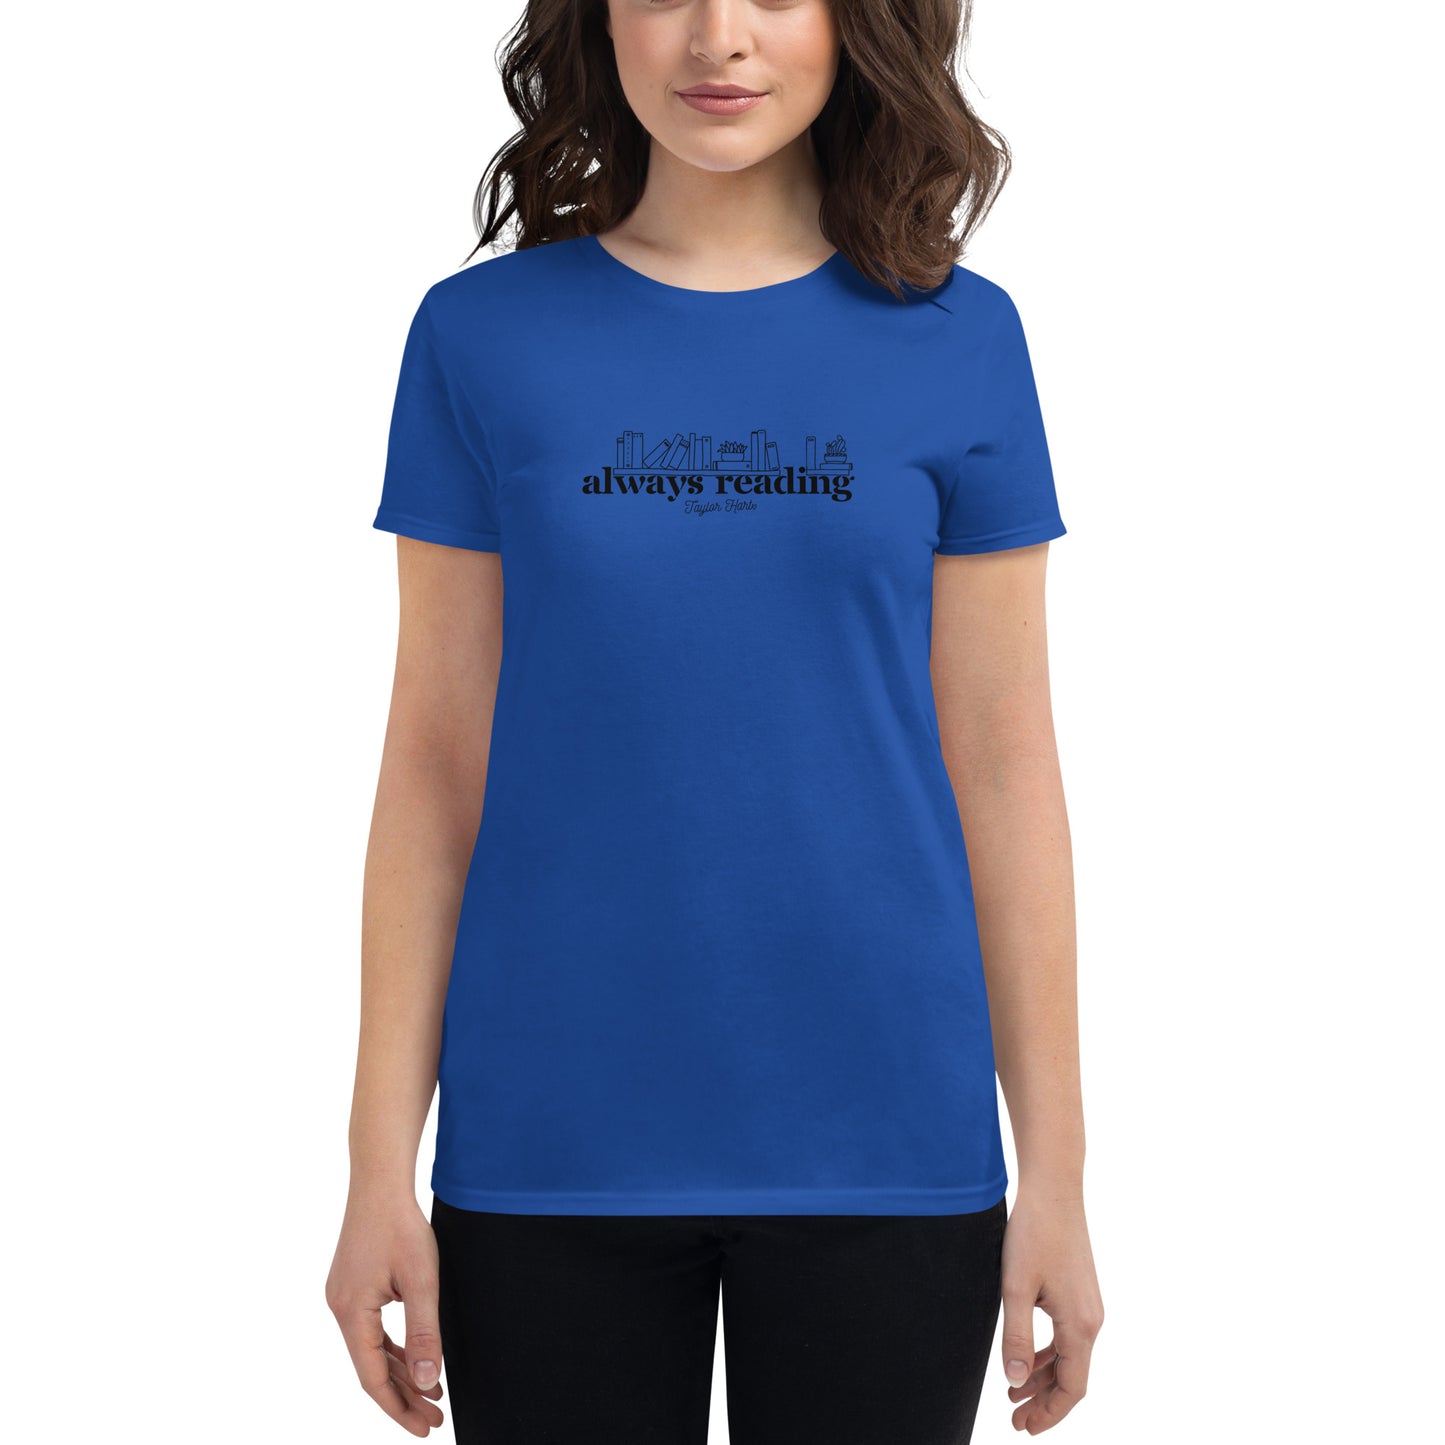 Always Reading Women's Short Sleeve Fitted Shirt